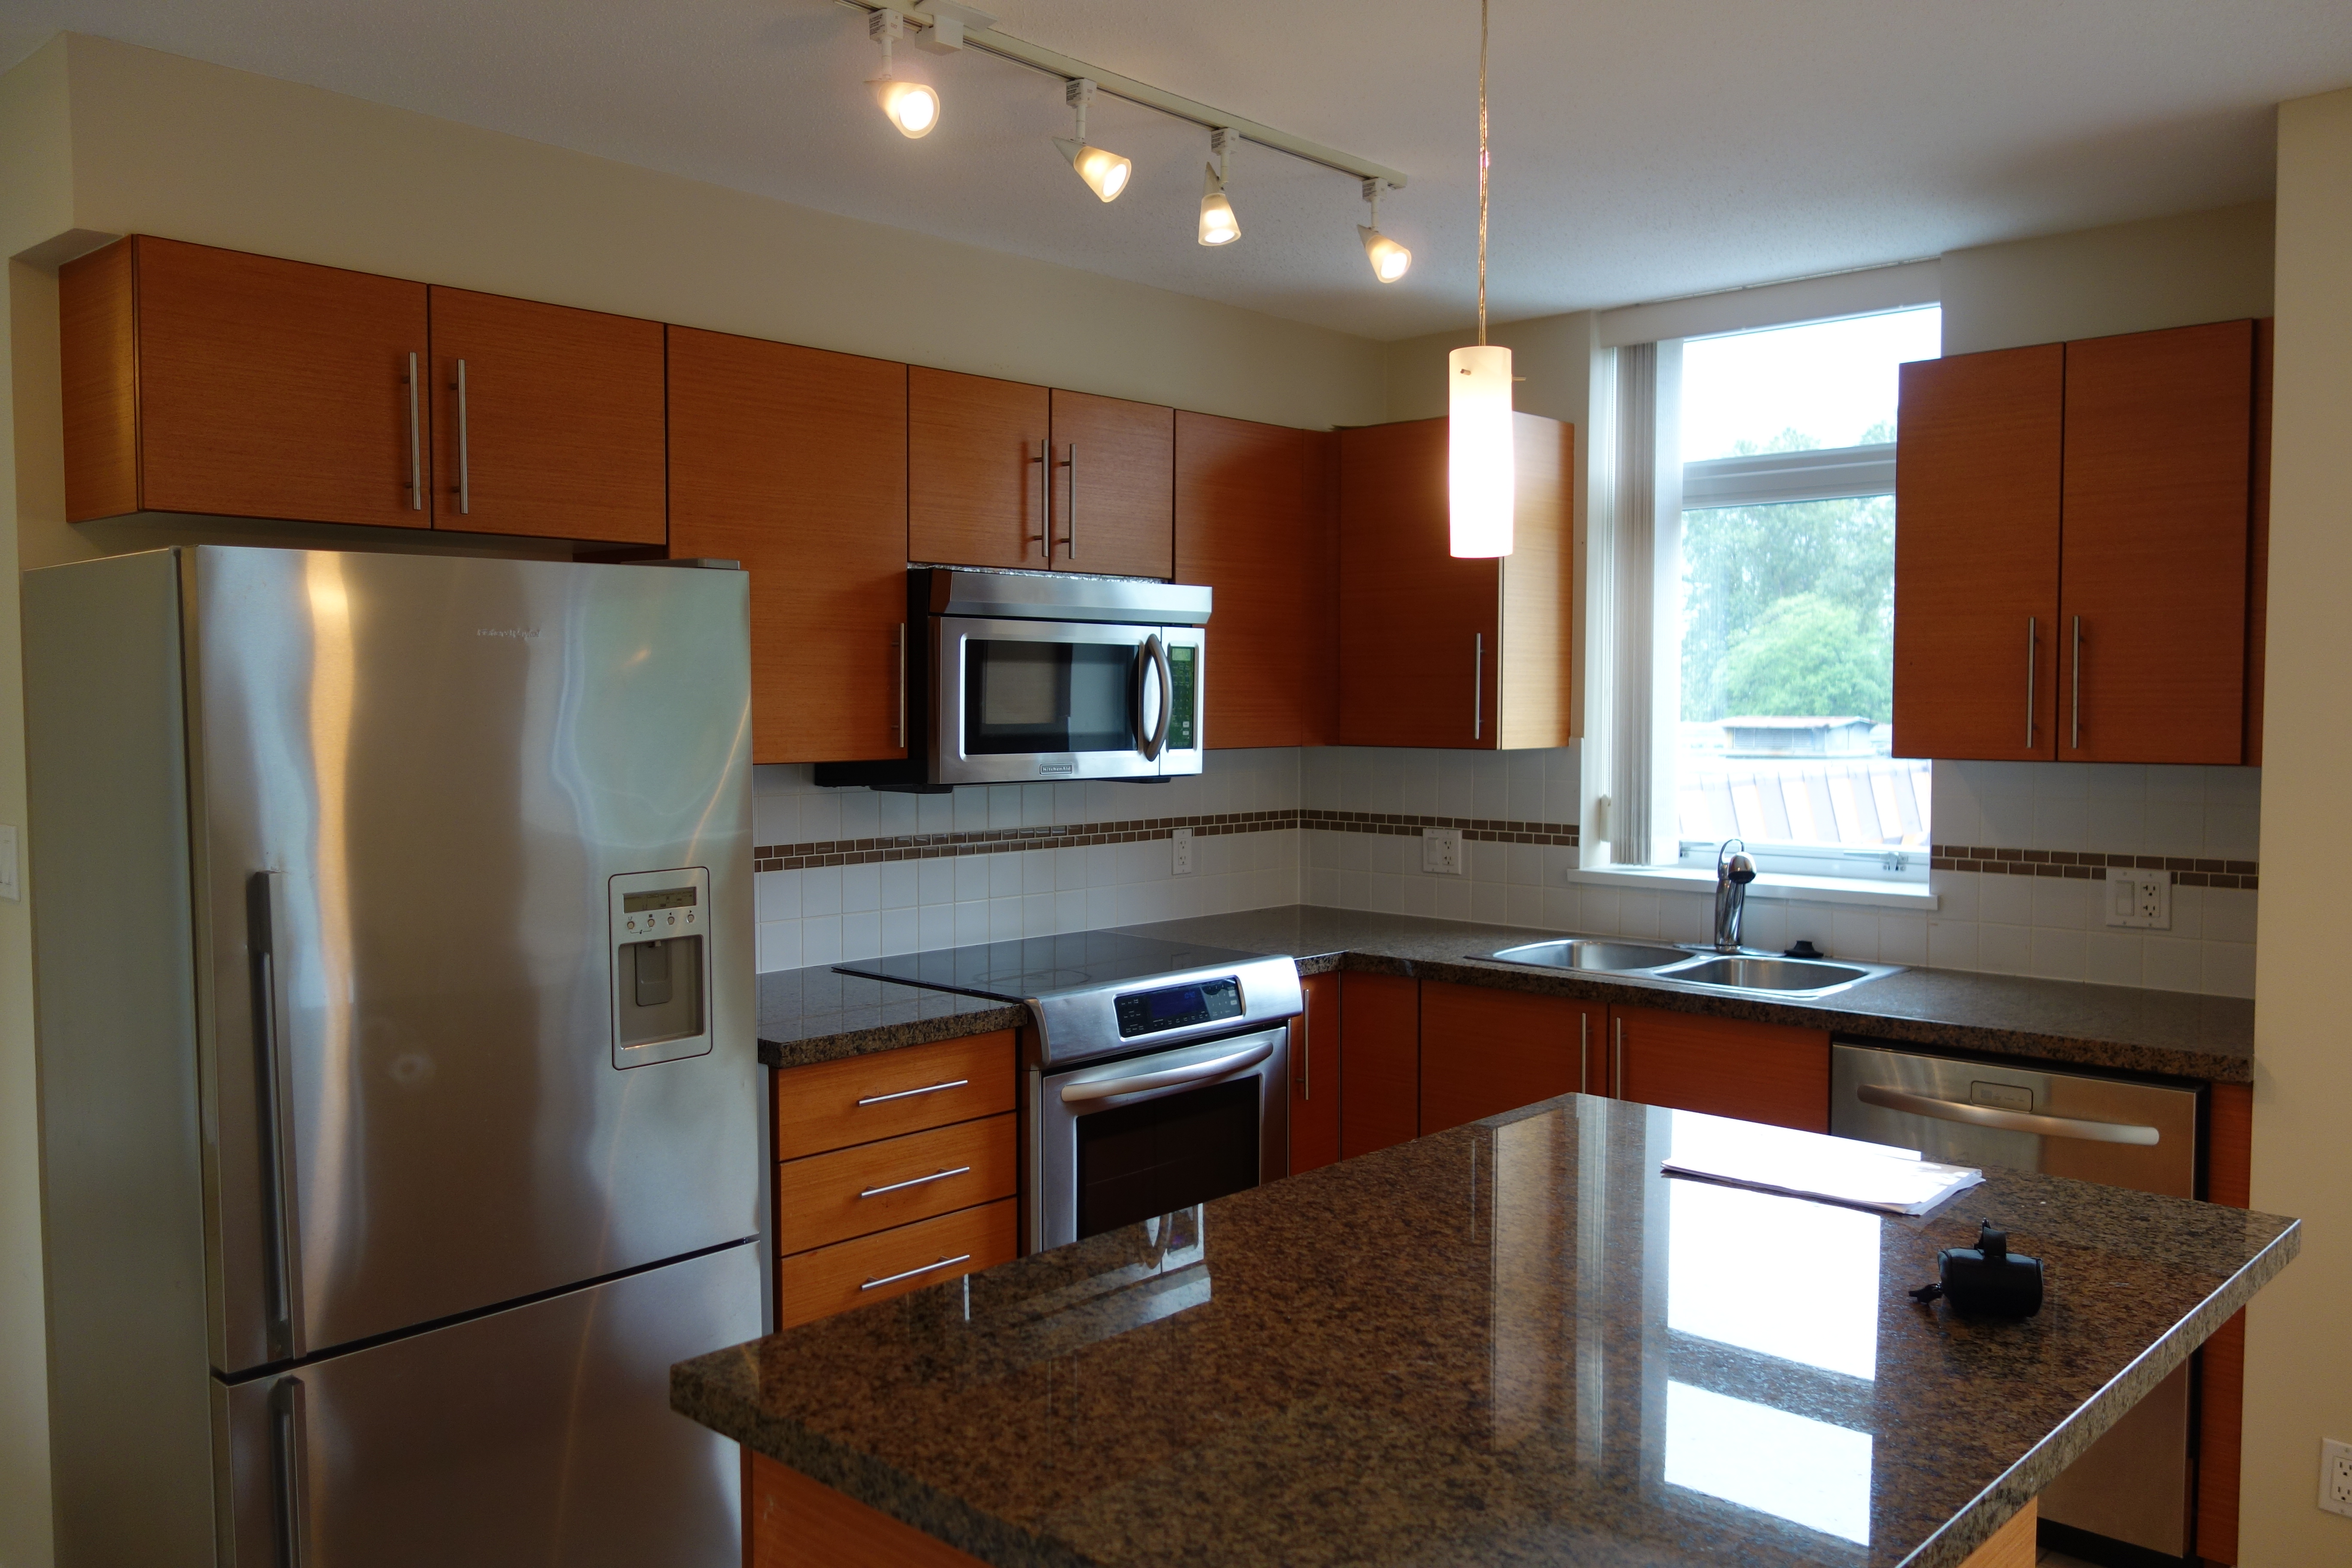 kitchen before home renovation brentwood - home renovations vancouver - flipside homes